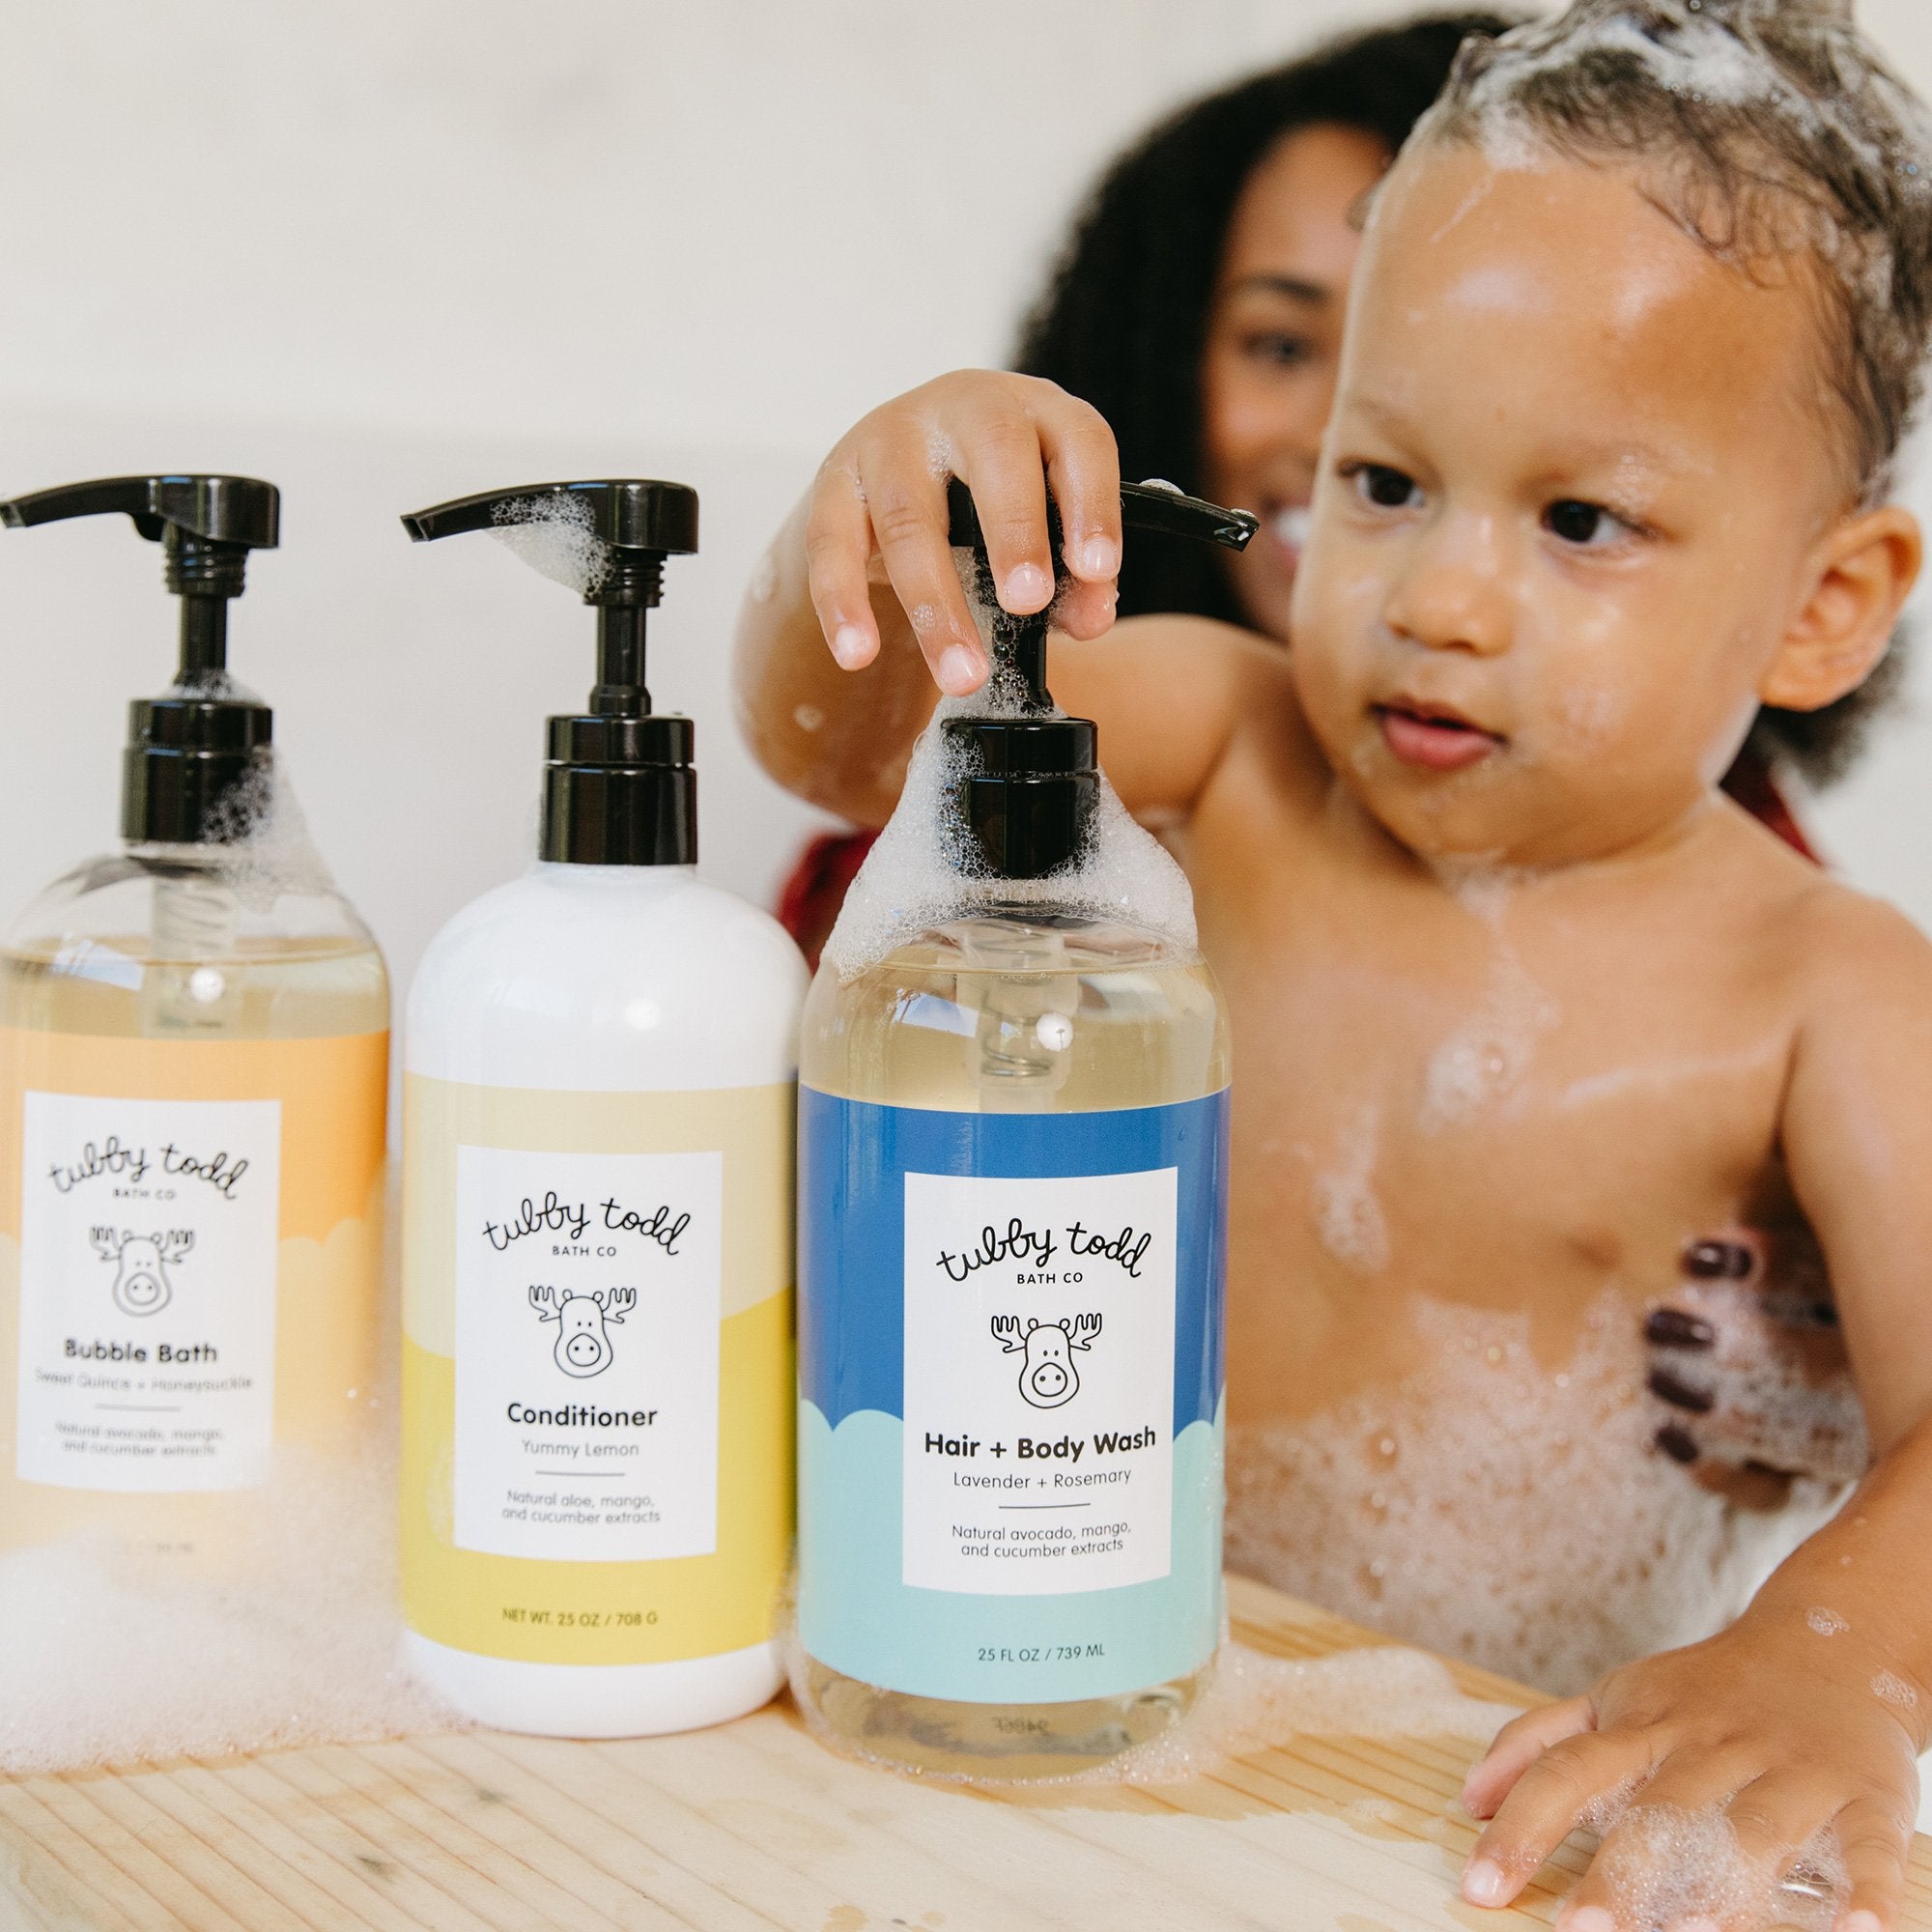 Baby holding the Hair Body Wash bottle in the bath tub with mom